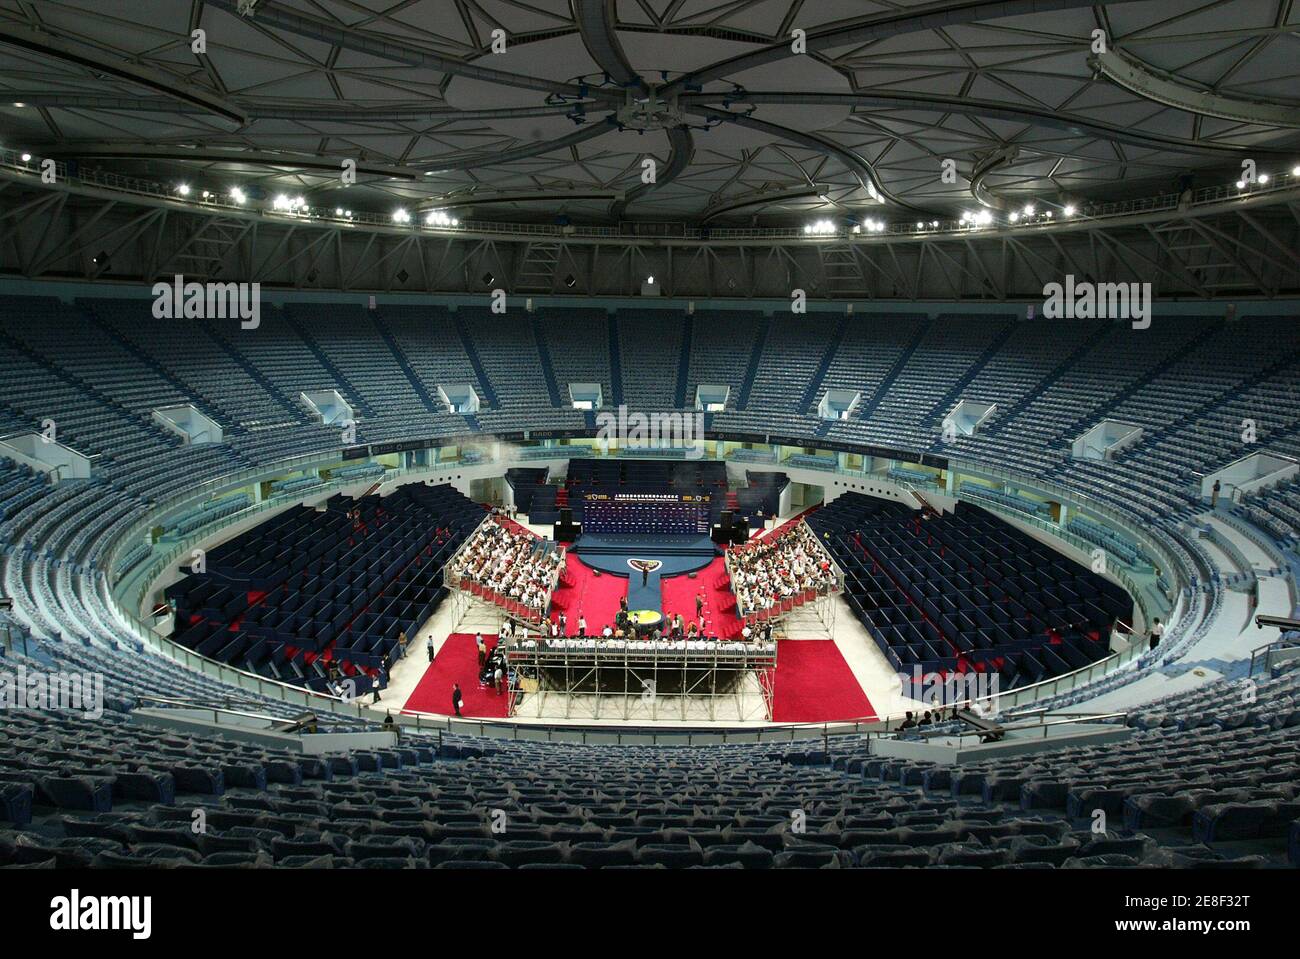 A general view of Shanghai Qi Zhong Tennis Center during its opening  ceremony, which was attended by world number one tennis player Roger  Federer of Switzerland, October 3, 2005. The Tennis Masters